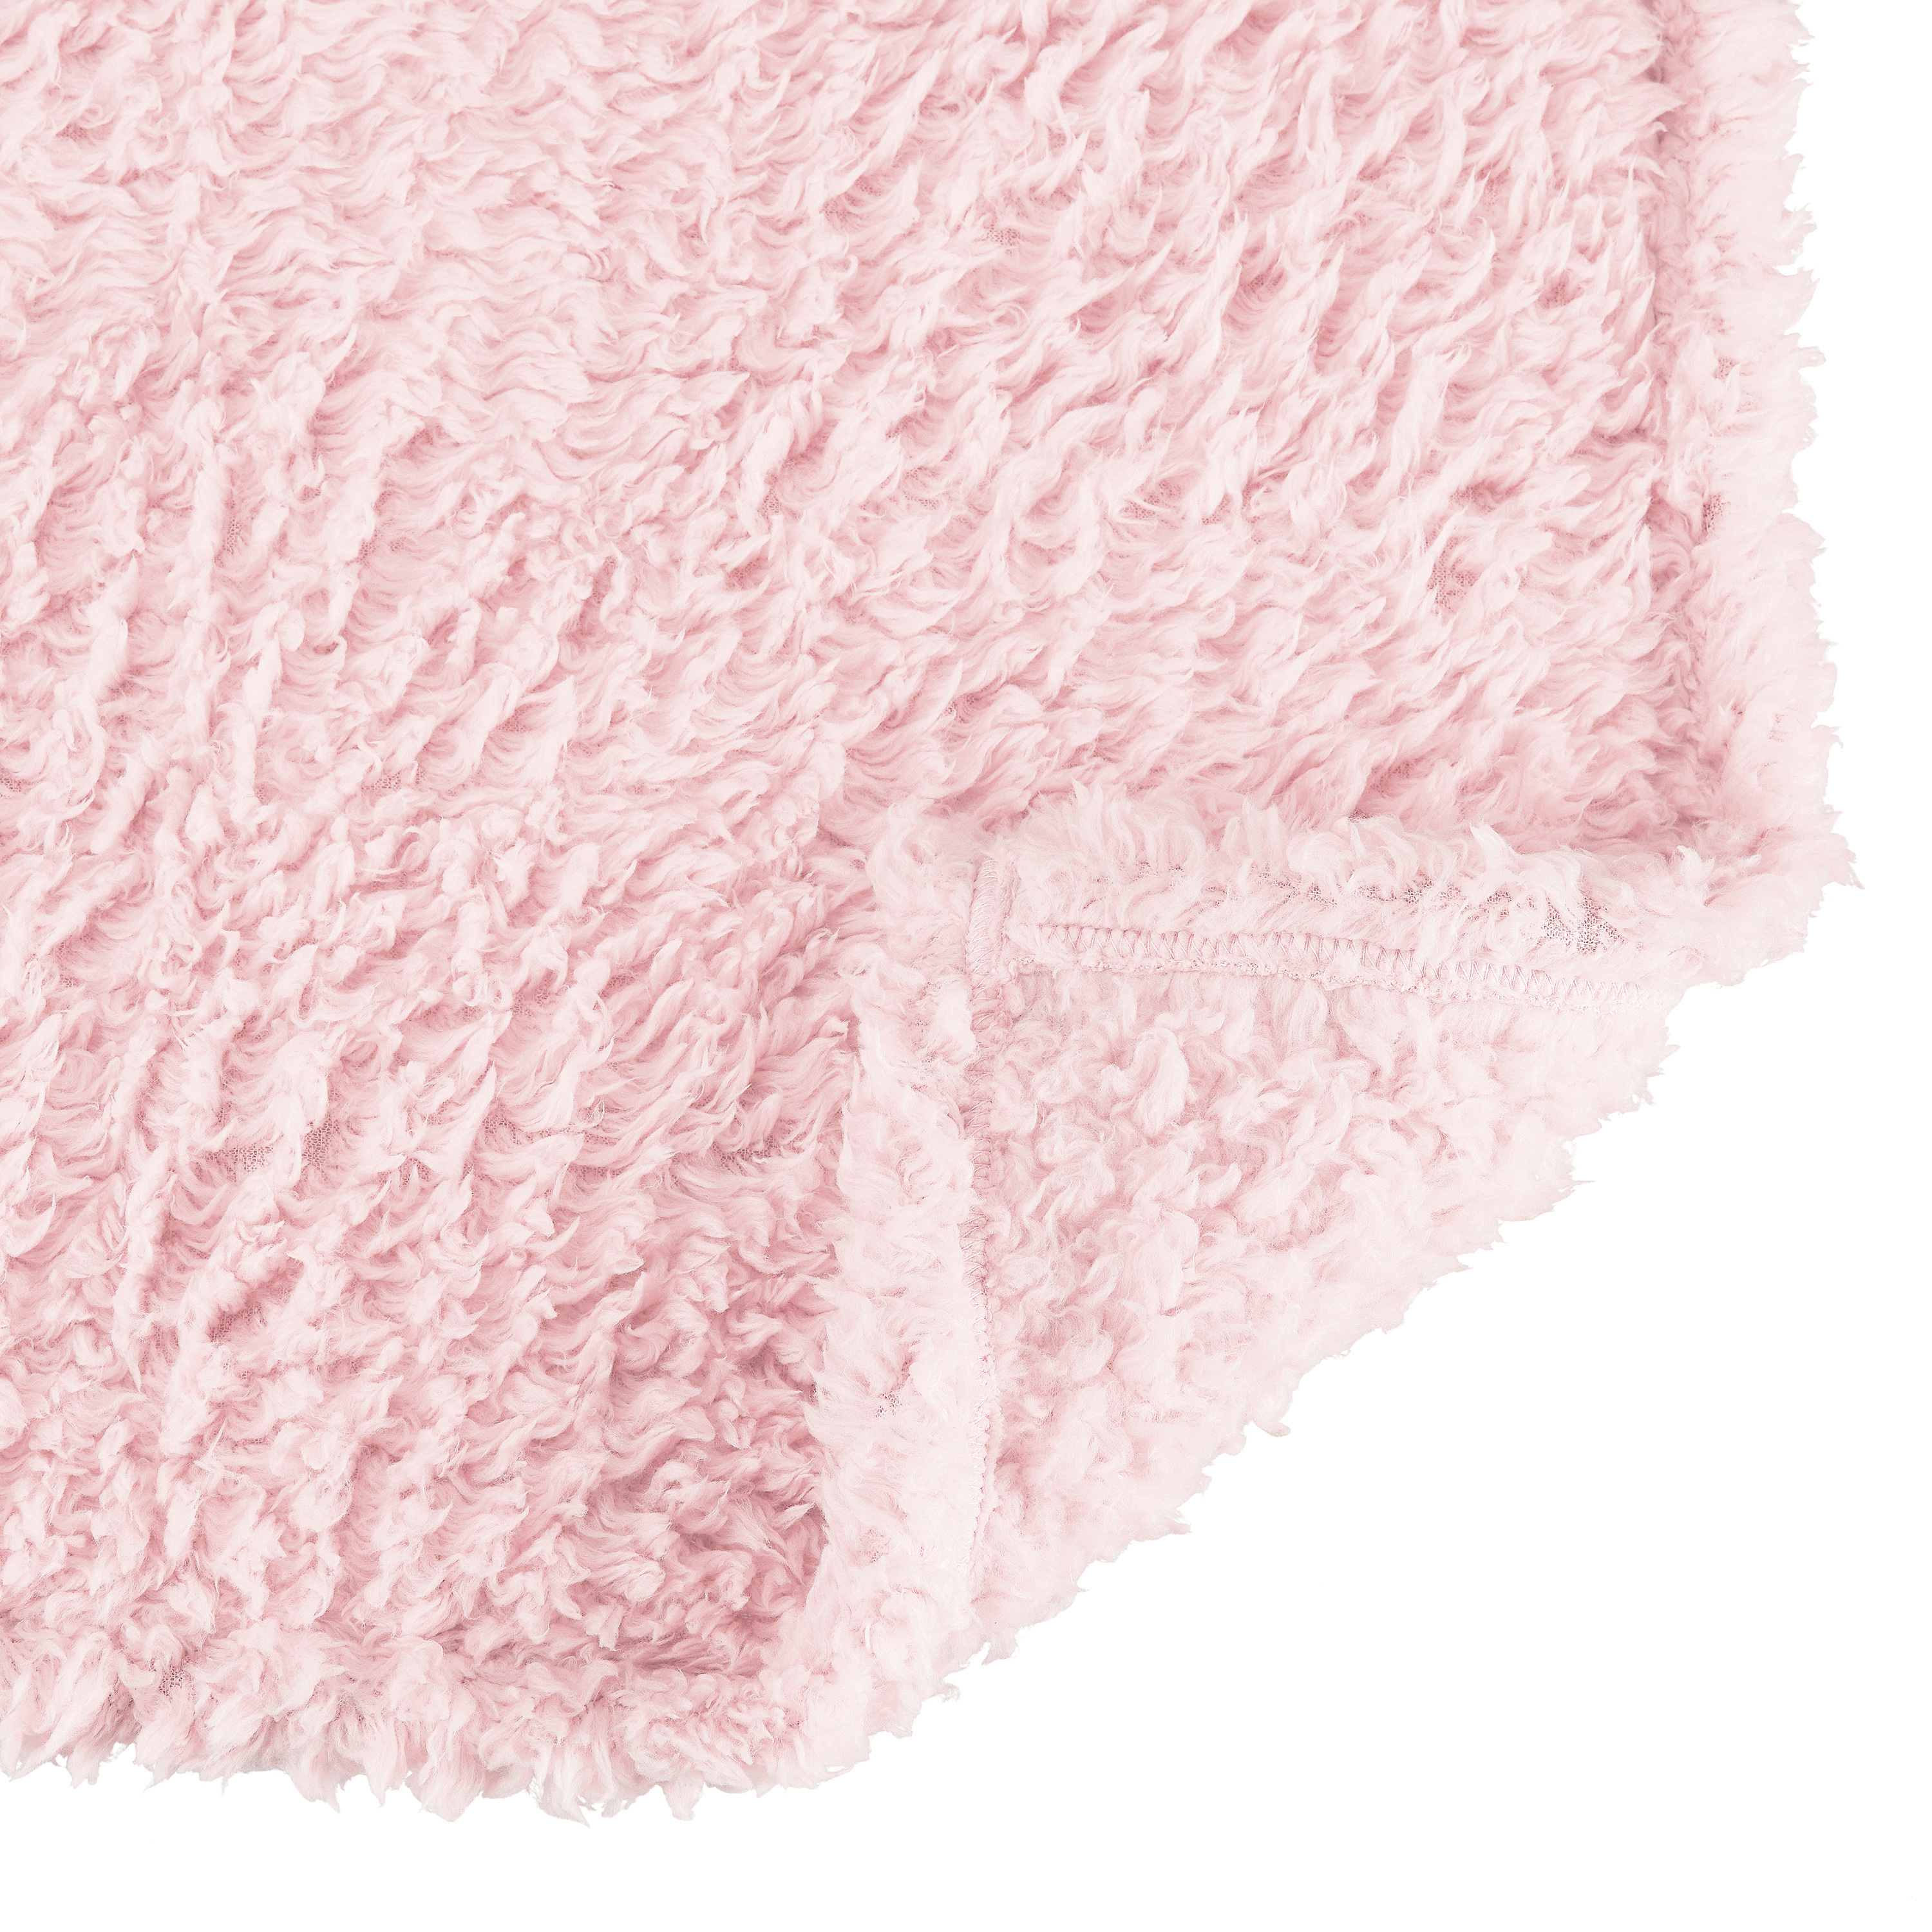 Mainstays Sherpa Throw Blanket, 50" X 60", Light Pink - image 5 of 5